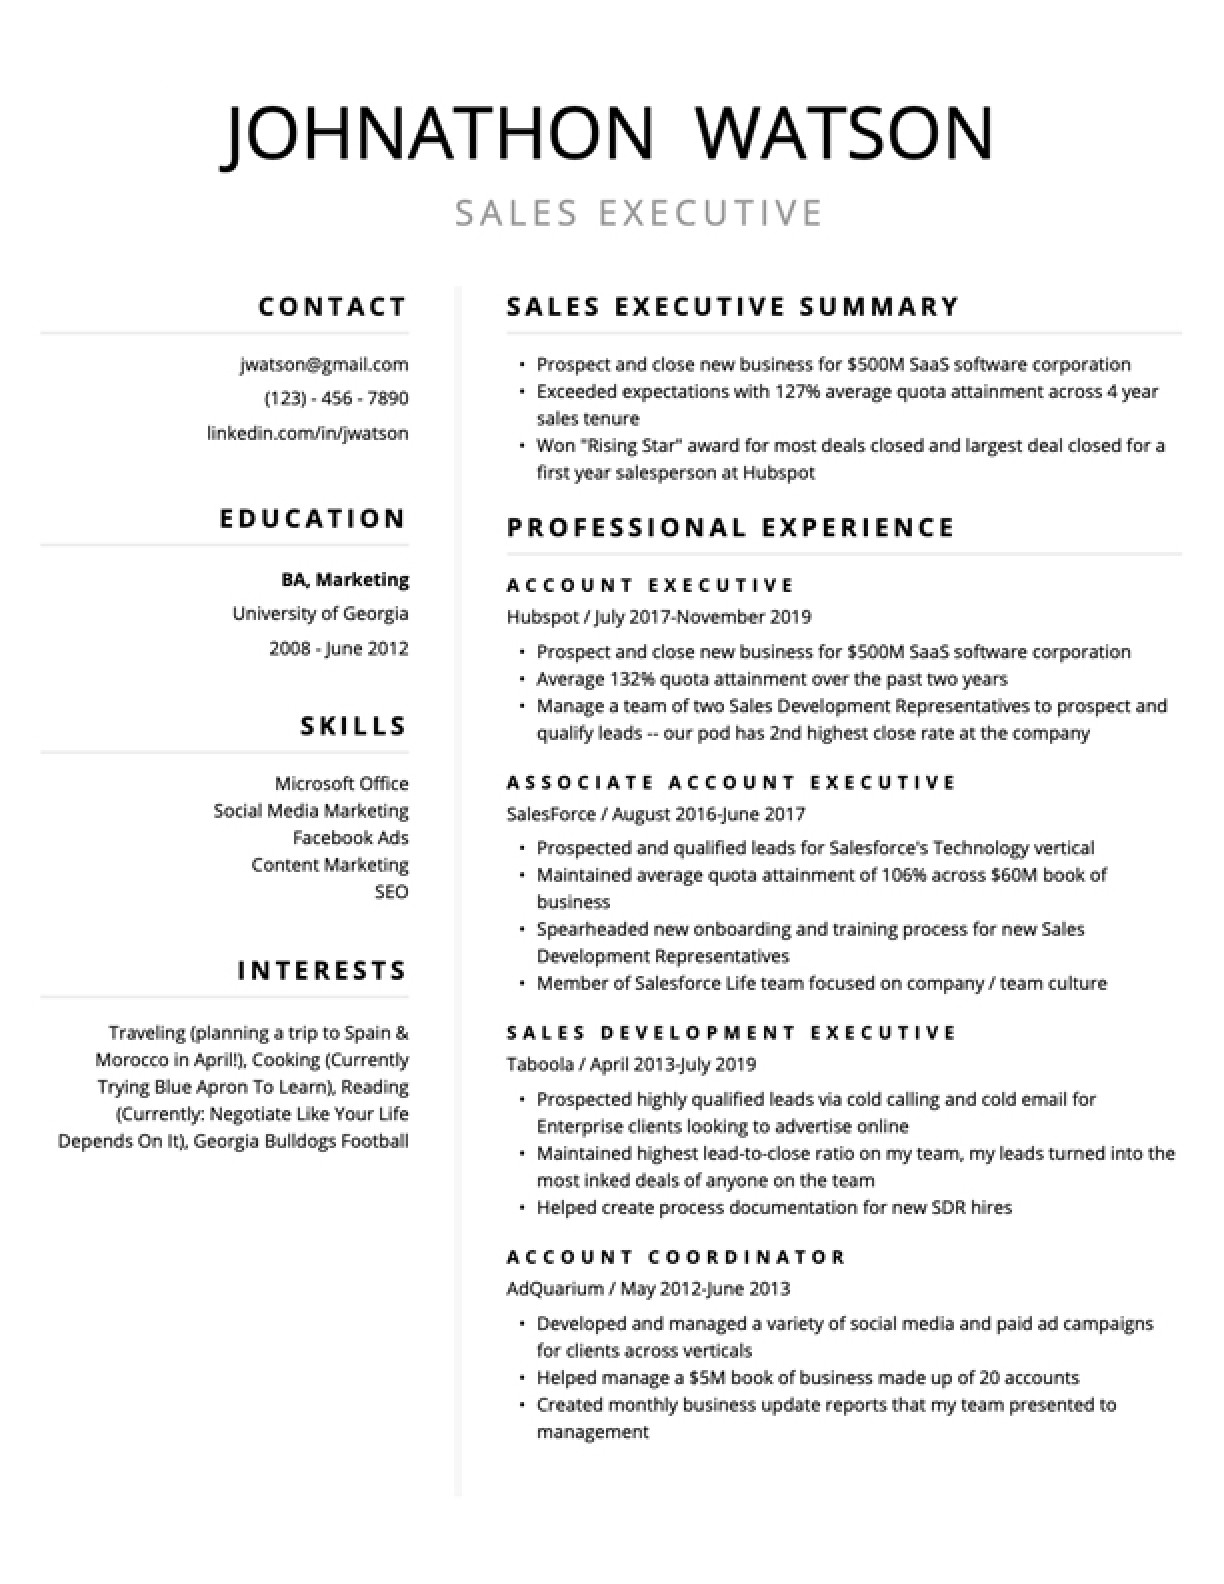 Free Sample Resume for Management Position Free Resume Templates for 2022 (edit & Download) Resybuild.io